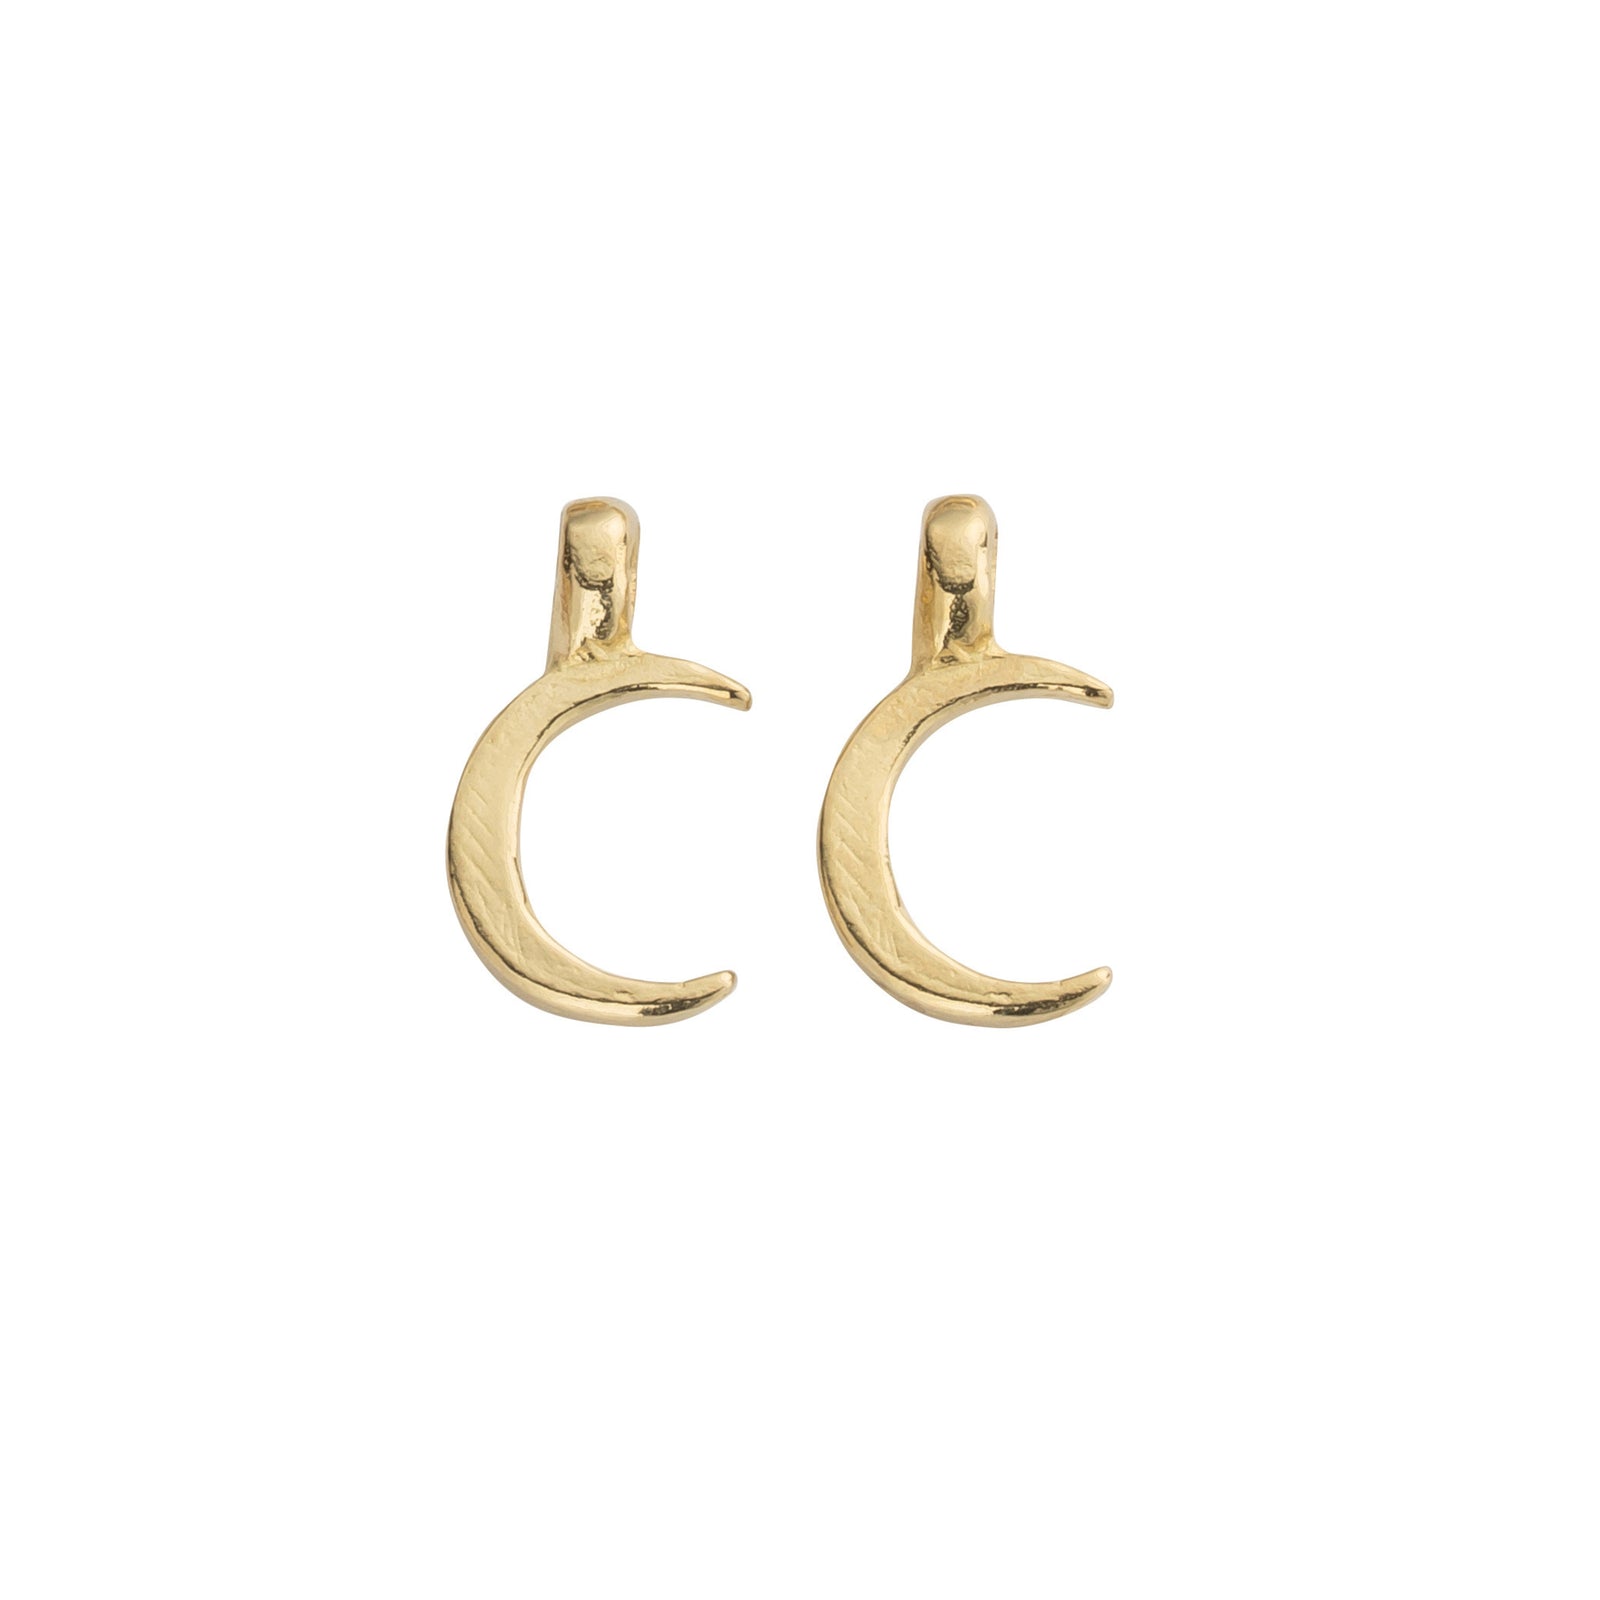 Gold Mini Crescent Moon Earring Charms